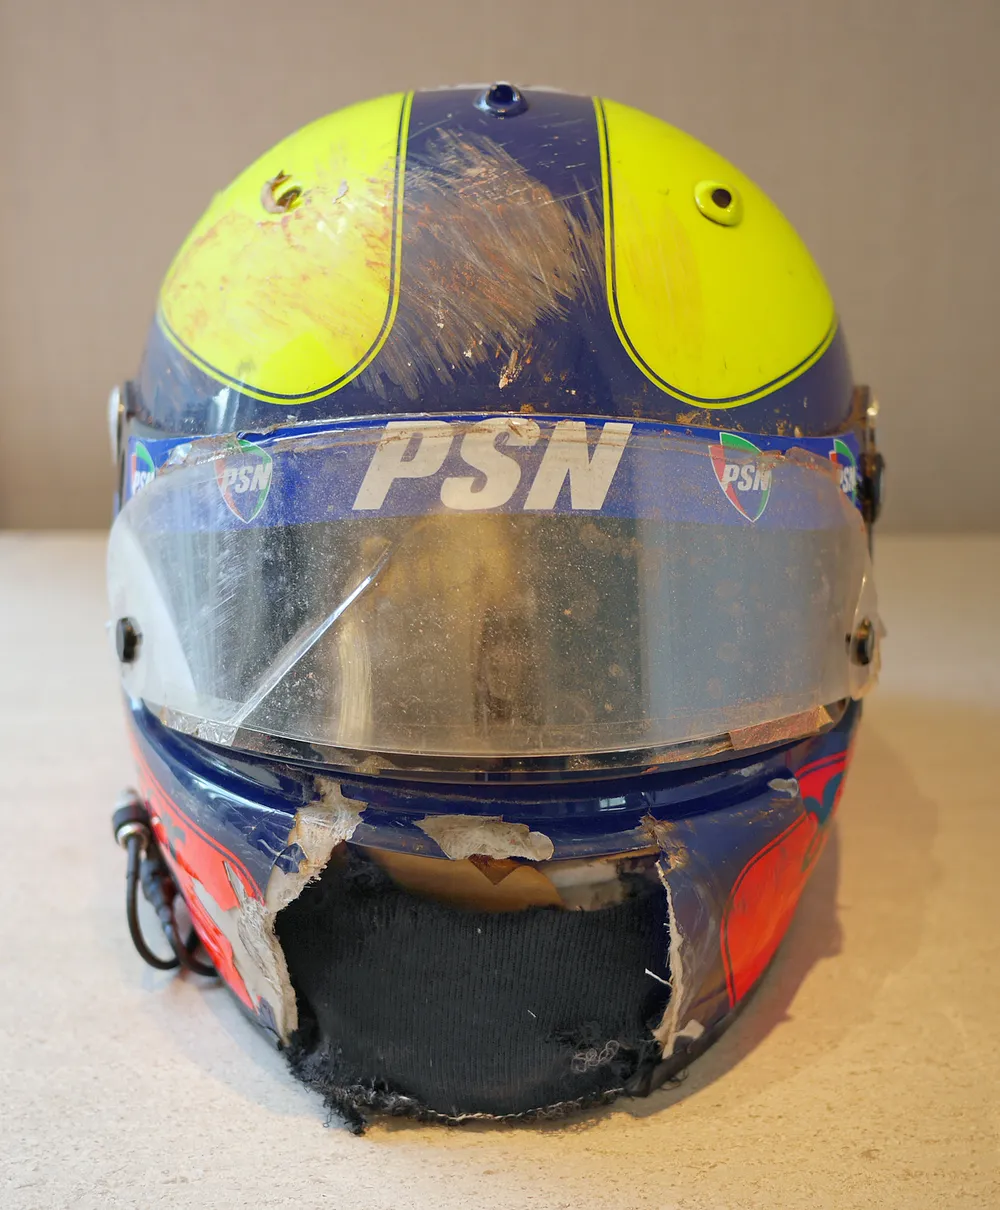 Luciano Burti's helmet was destroyed after a serious accident at the 2001 Belgian GP - Personal archive